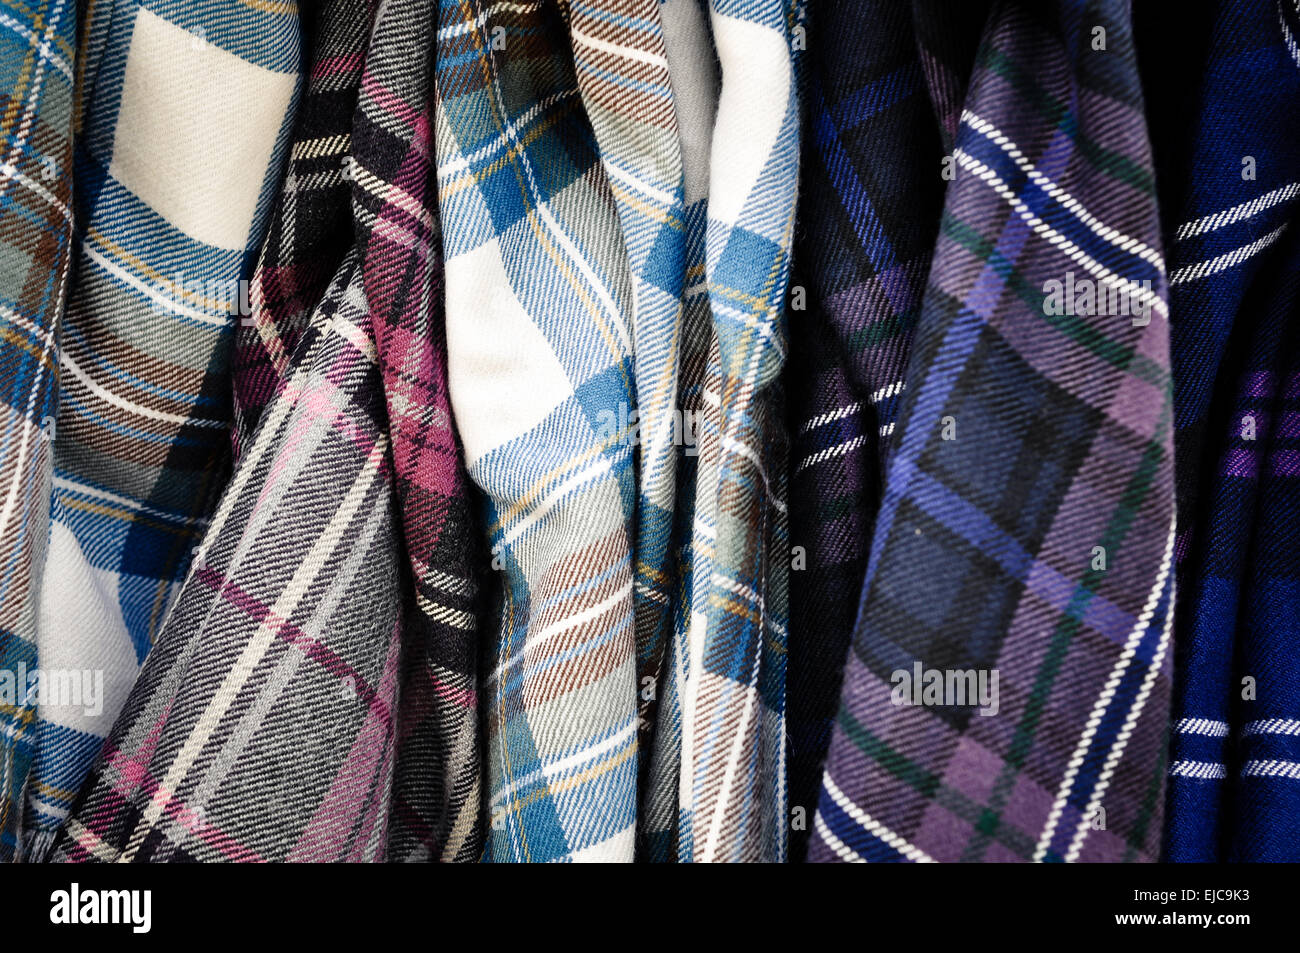 Plaid Skirts for Sale Stock Photo